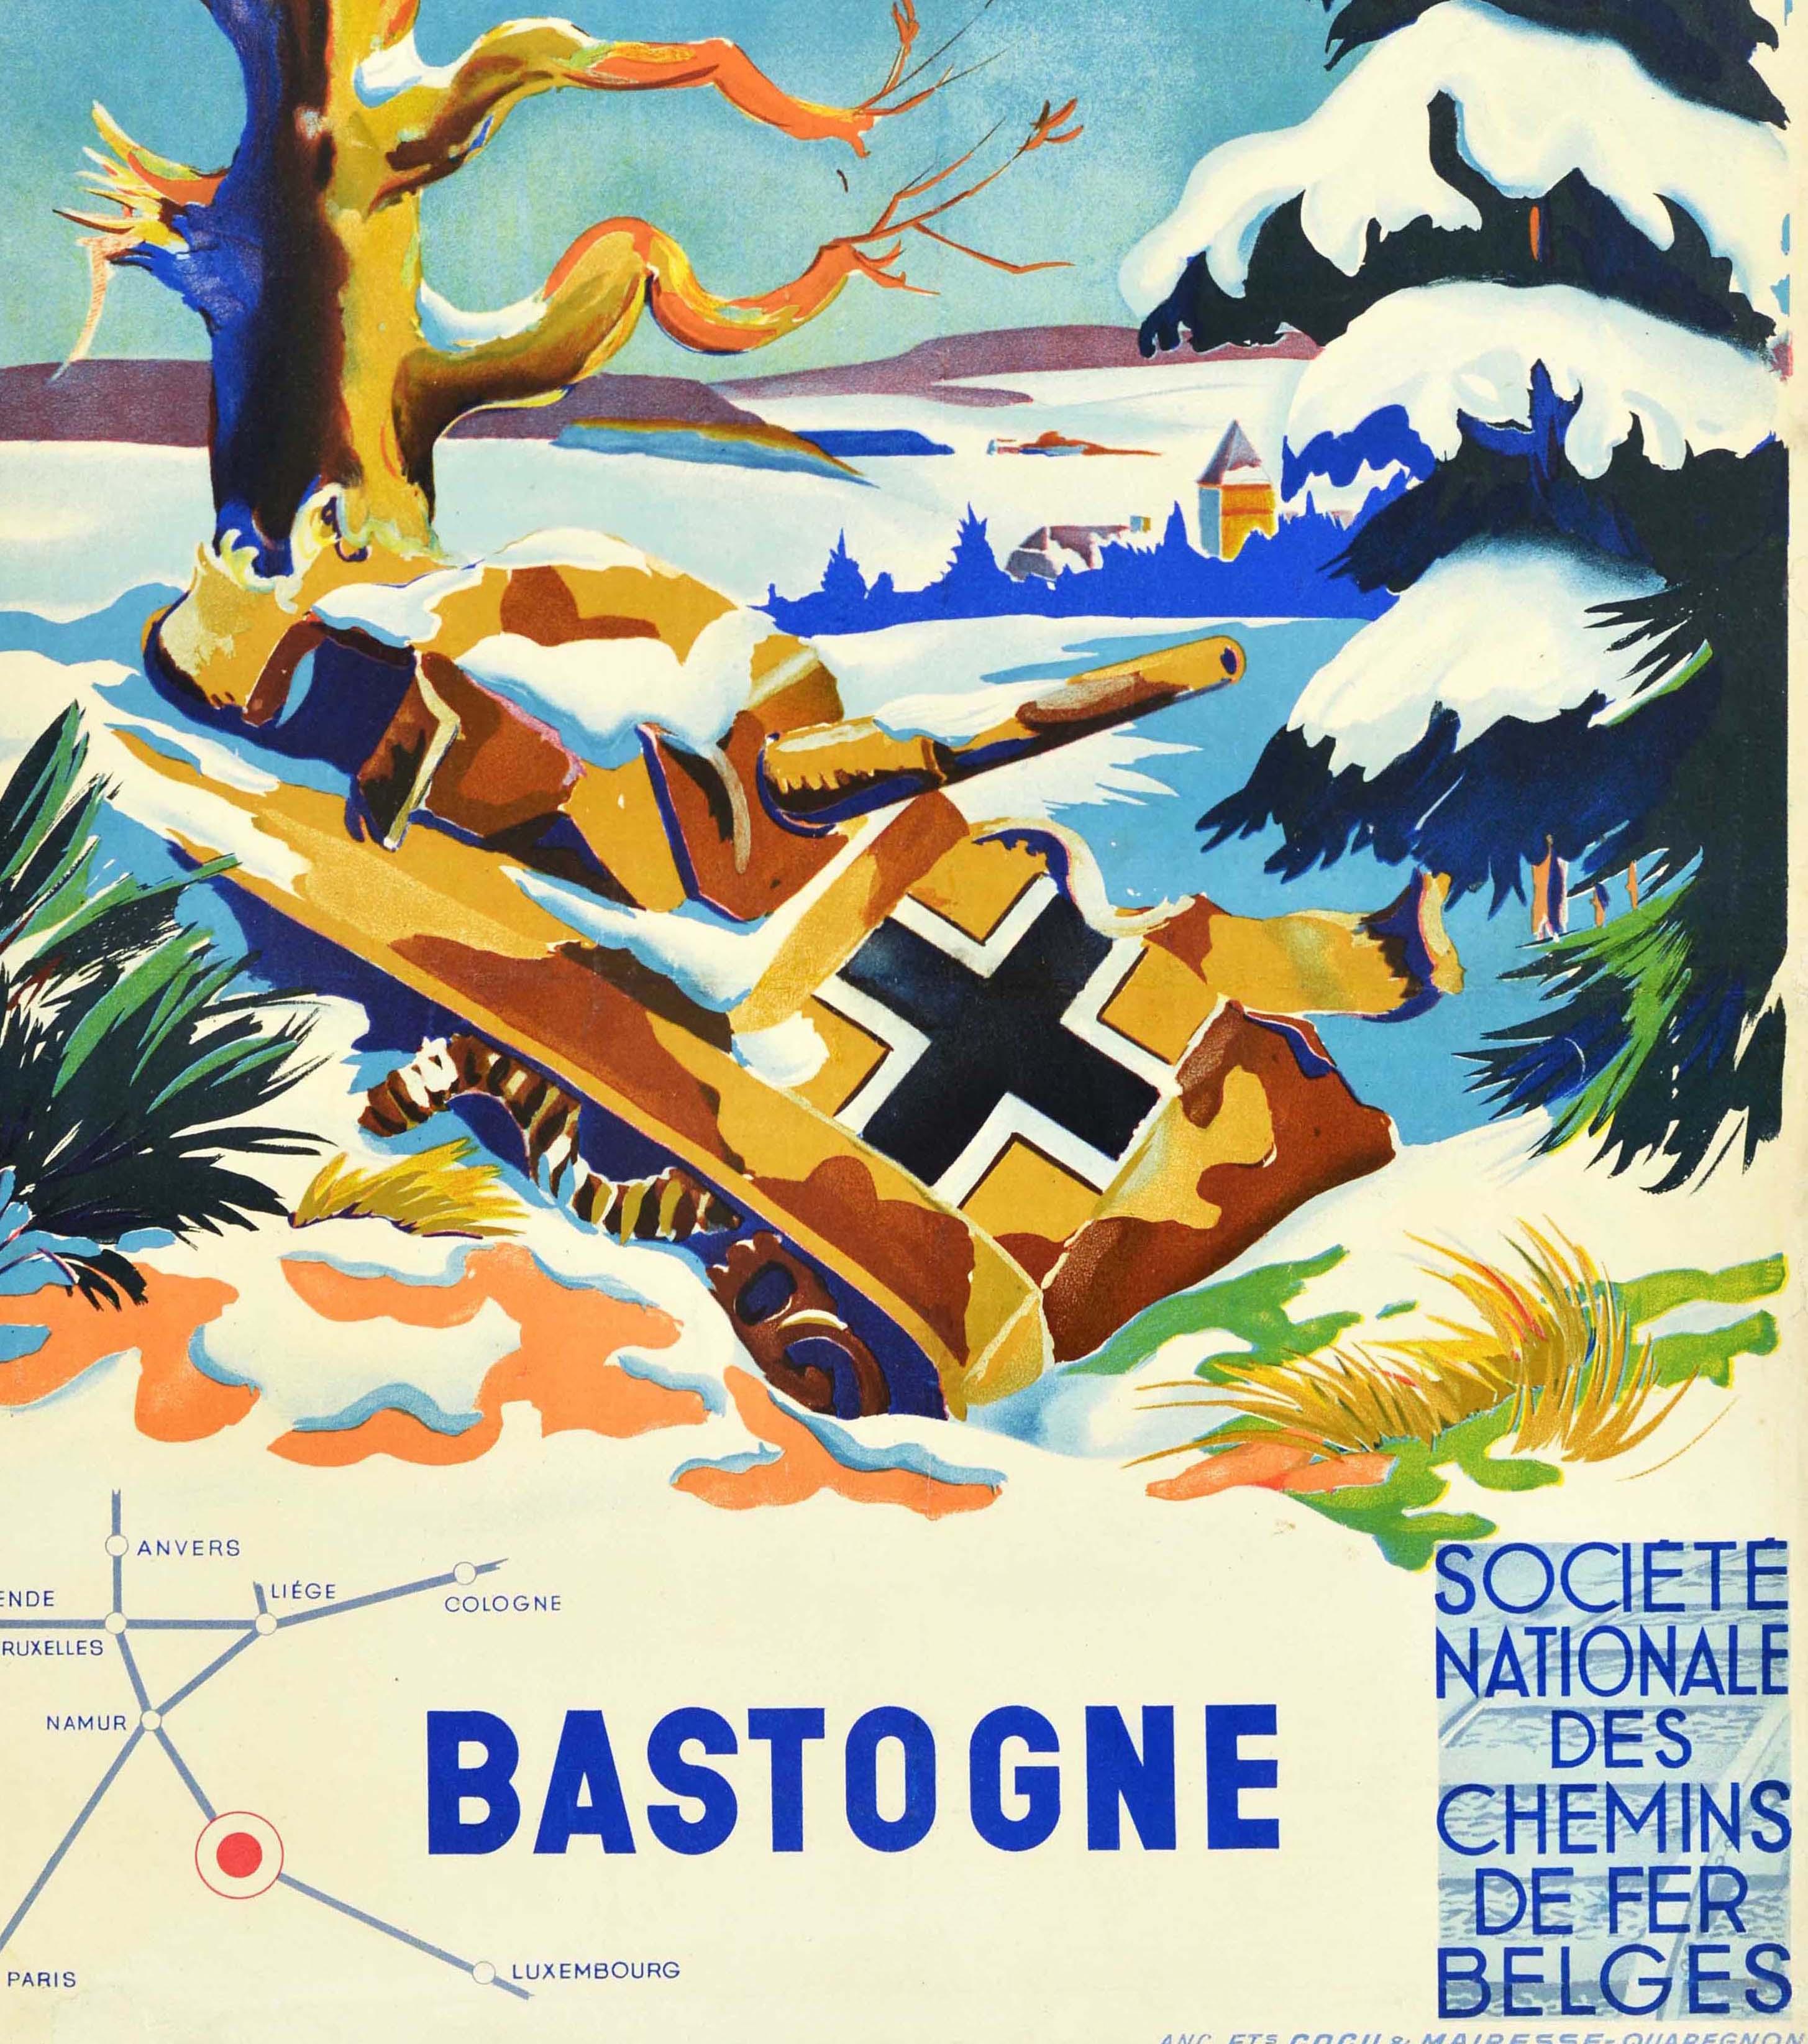 Original vintage post-WWII railway travel poster for Bastogne Societe Nationale des Chemins de Fer Belges / Belgian National Railway Company. Colourful illustration of a discarded German Nazi tank covered in snow in a trench by a war torn tree with